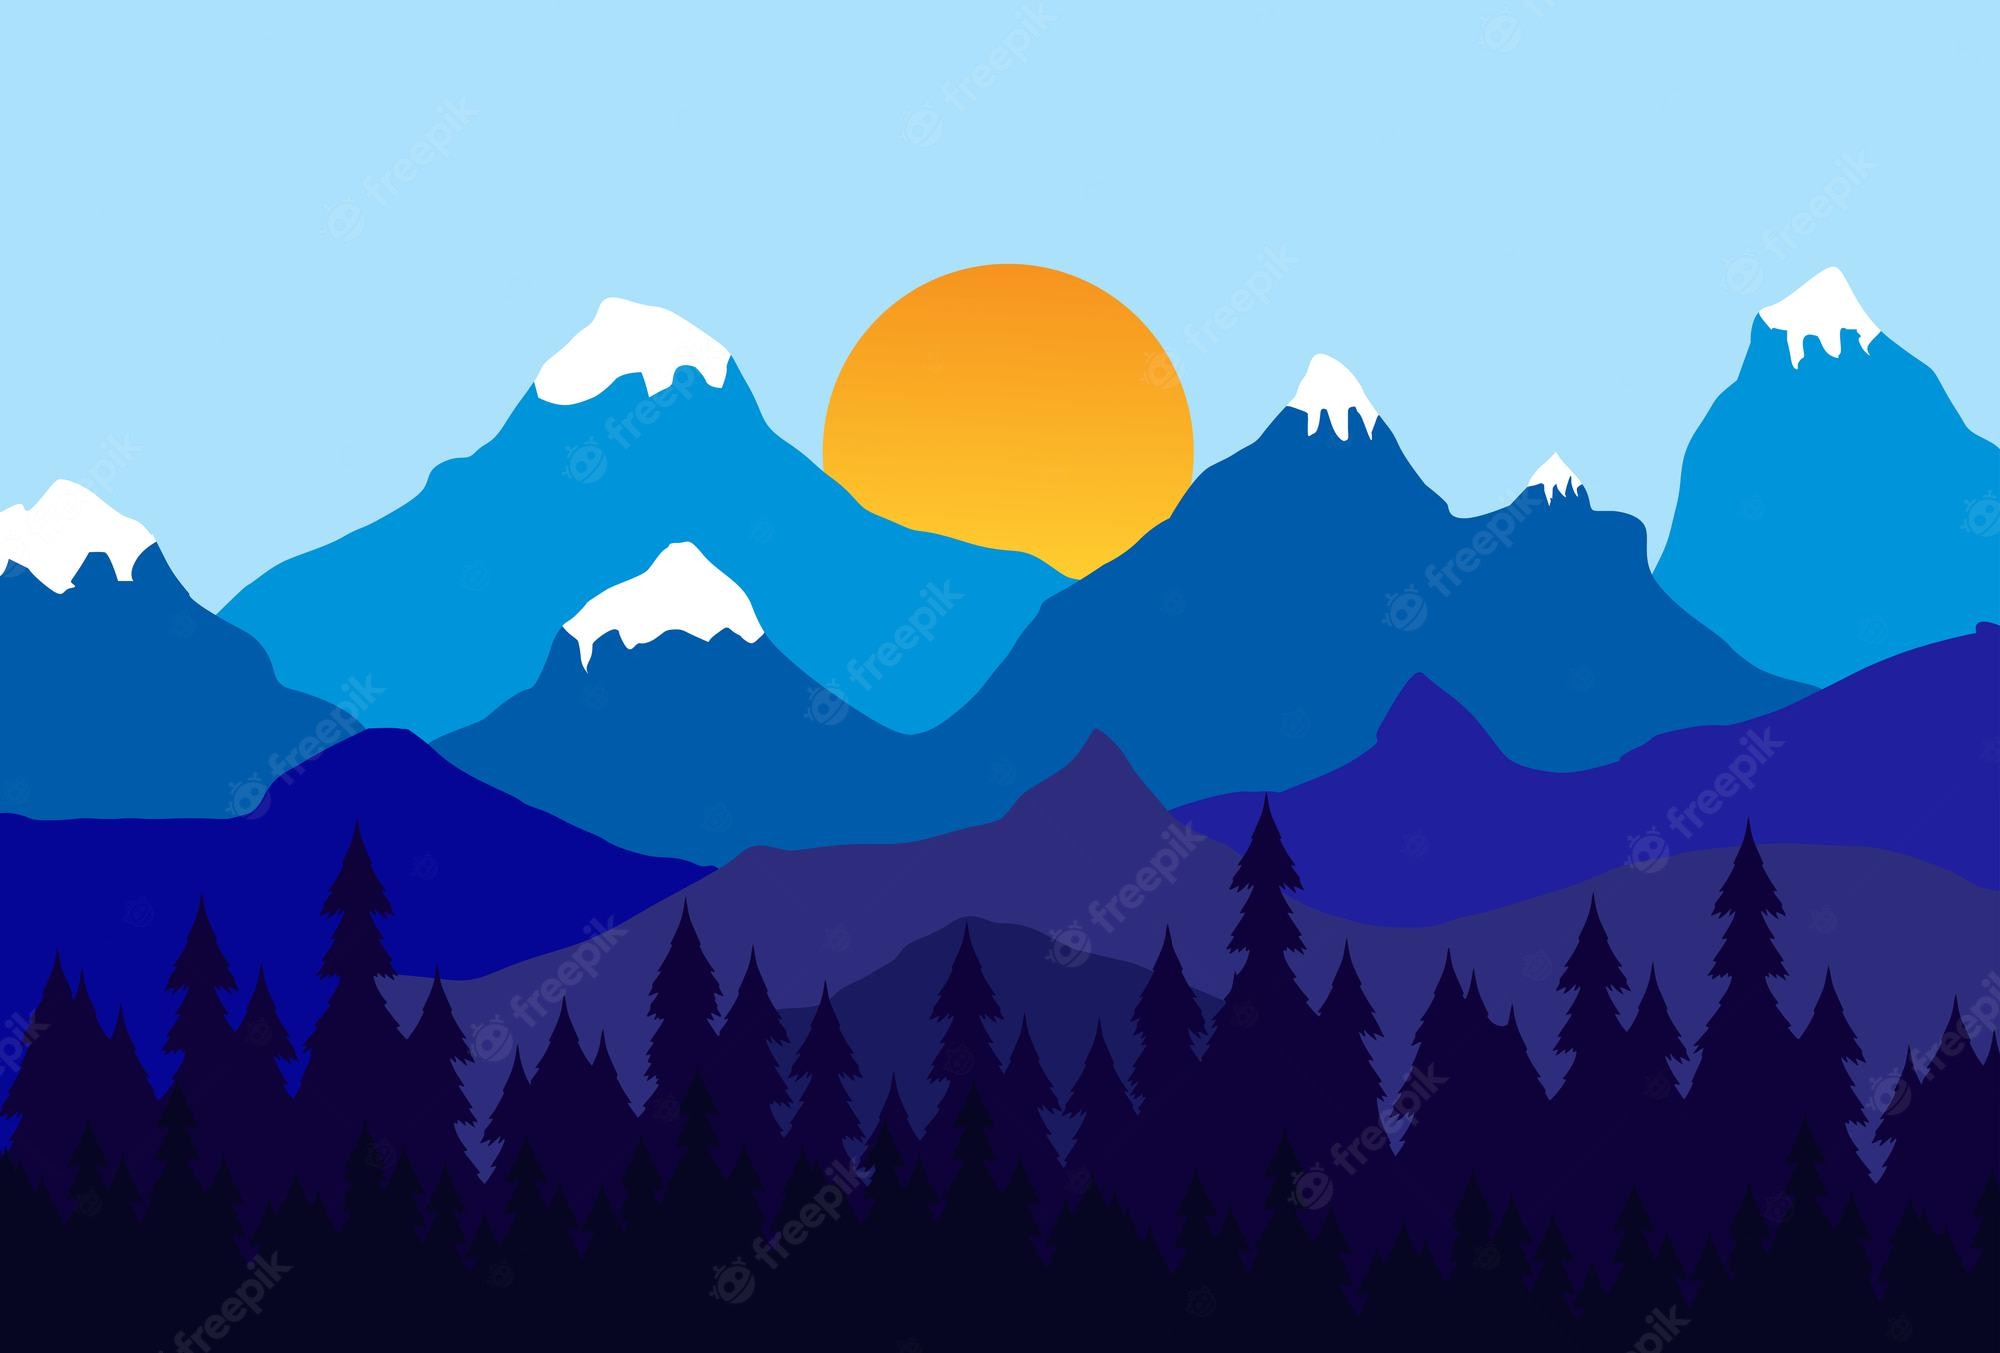 Forest And Mountains Illustrations Wallpapers